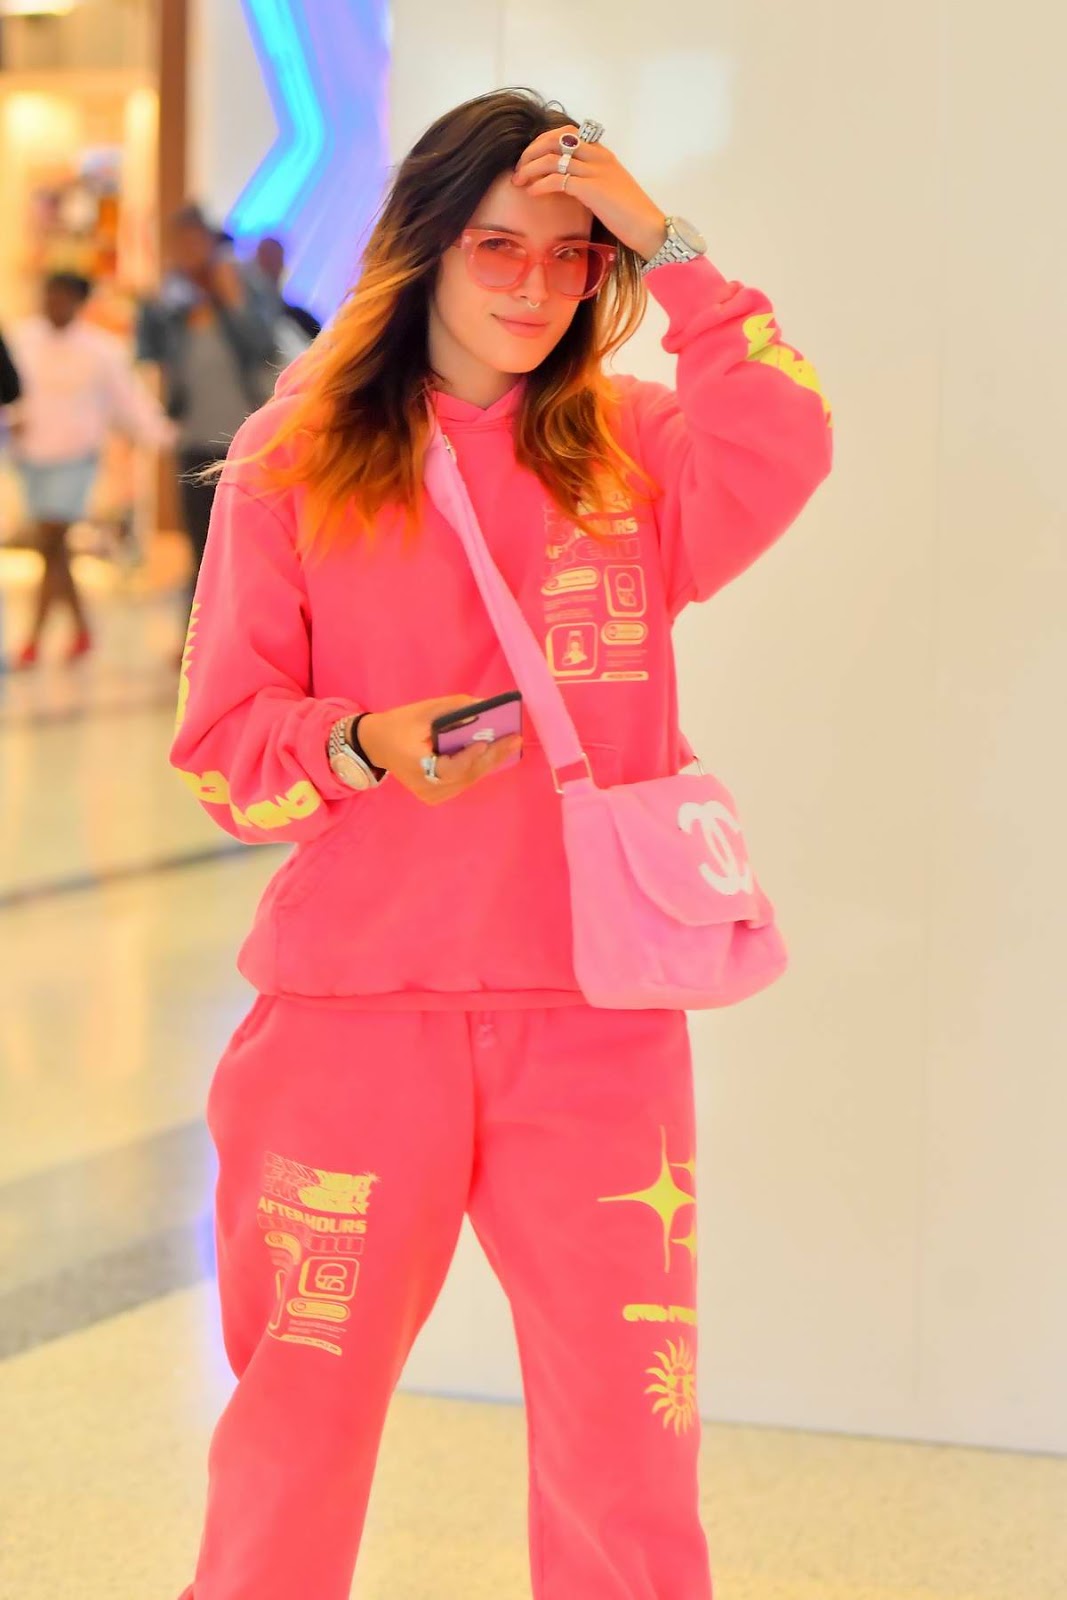 Bella Thorne celebrities travel outfits ideas